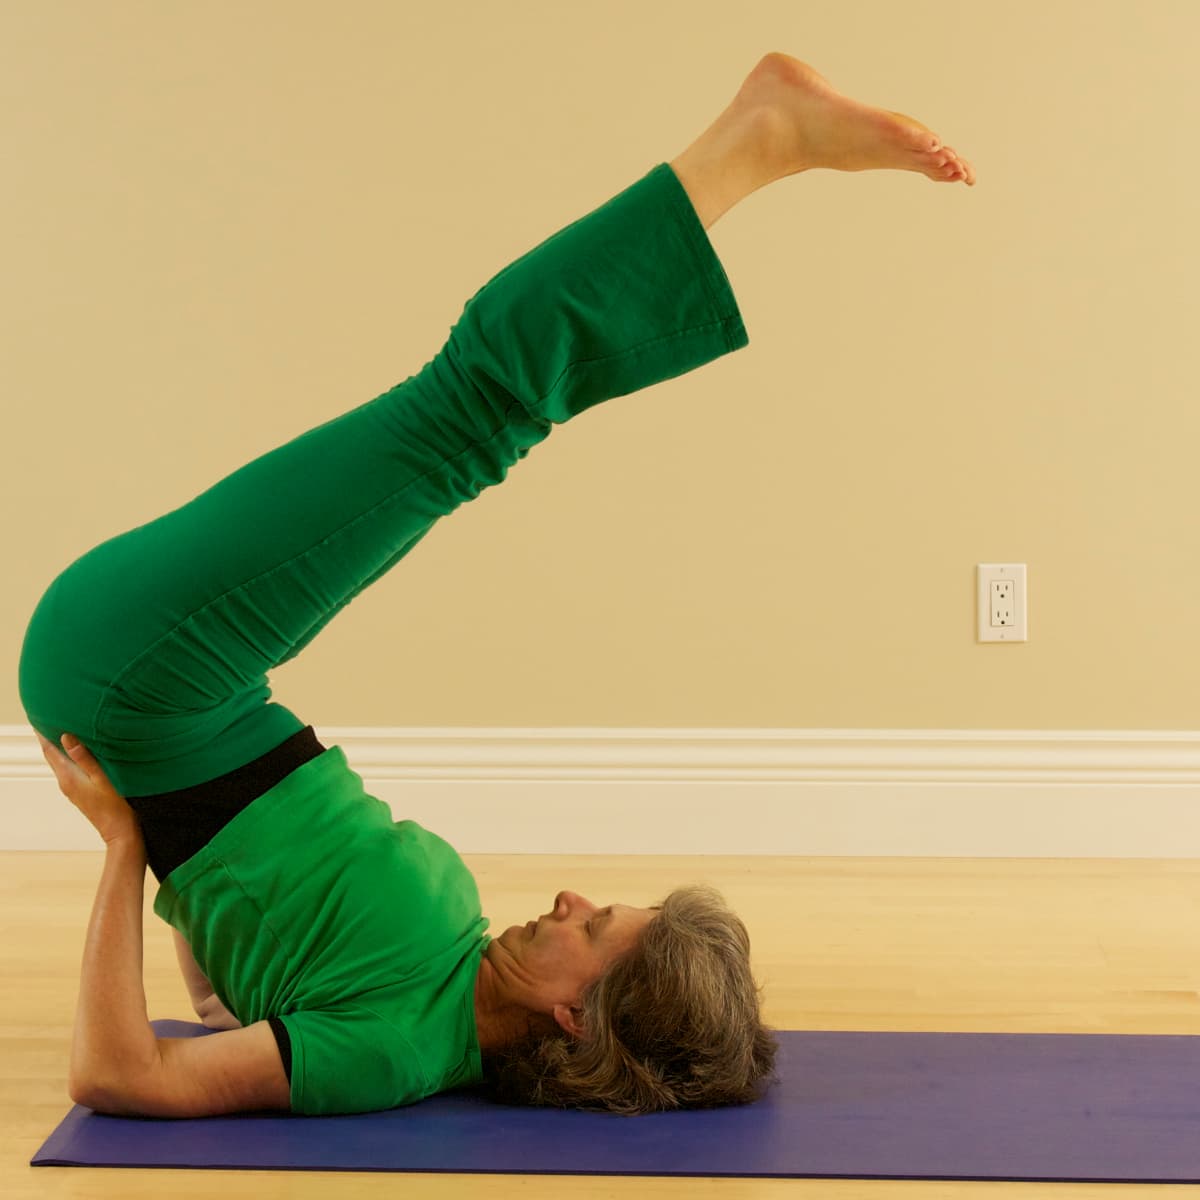 Master Shoulder Stand with Candle Pose (Yoga Poses for Kids) — Yo Re Mi